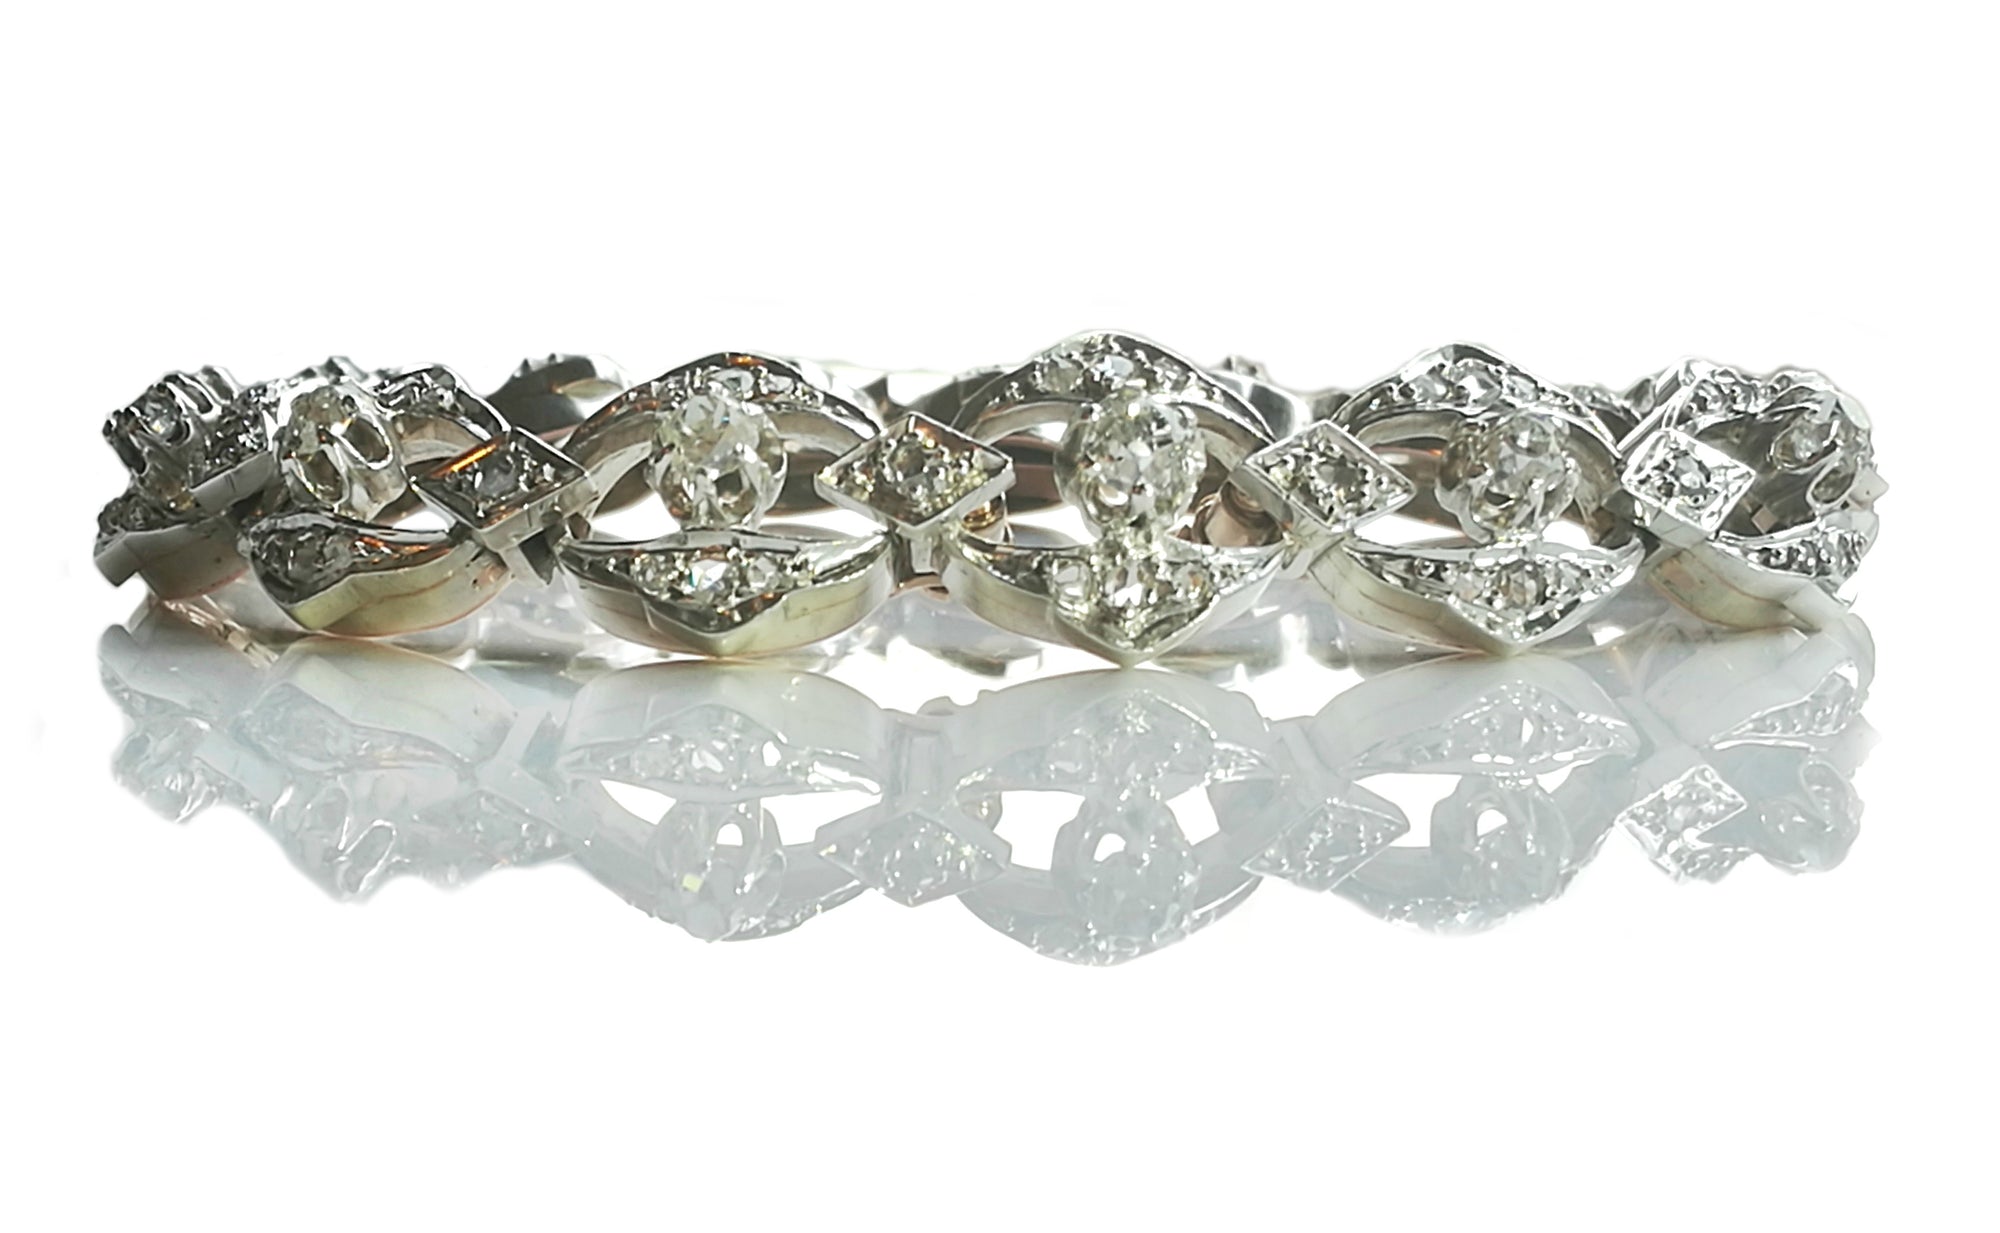 Antique French Victorian 4.50ct Old Cut Diamond Bracelet in Silver & 18k Gold